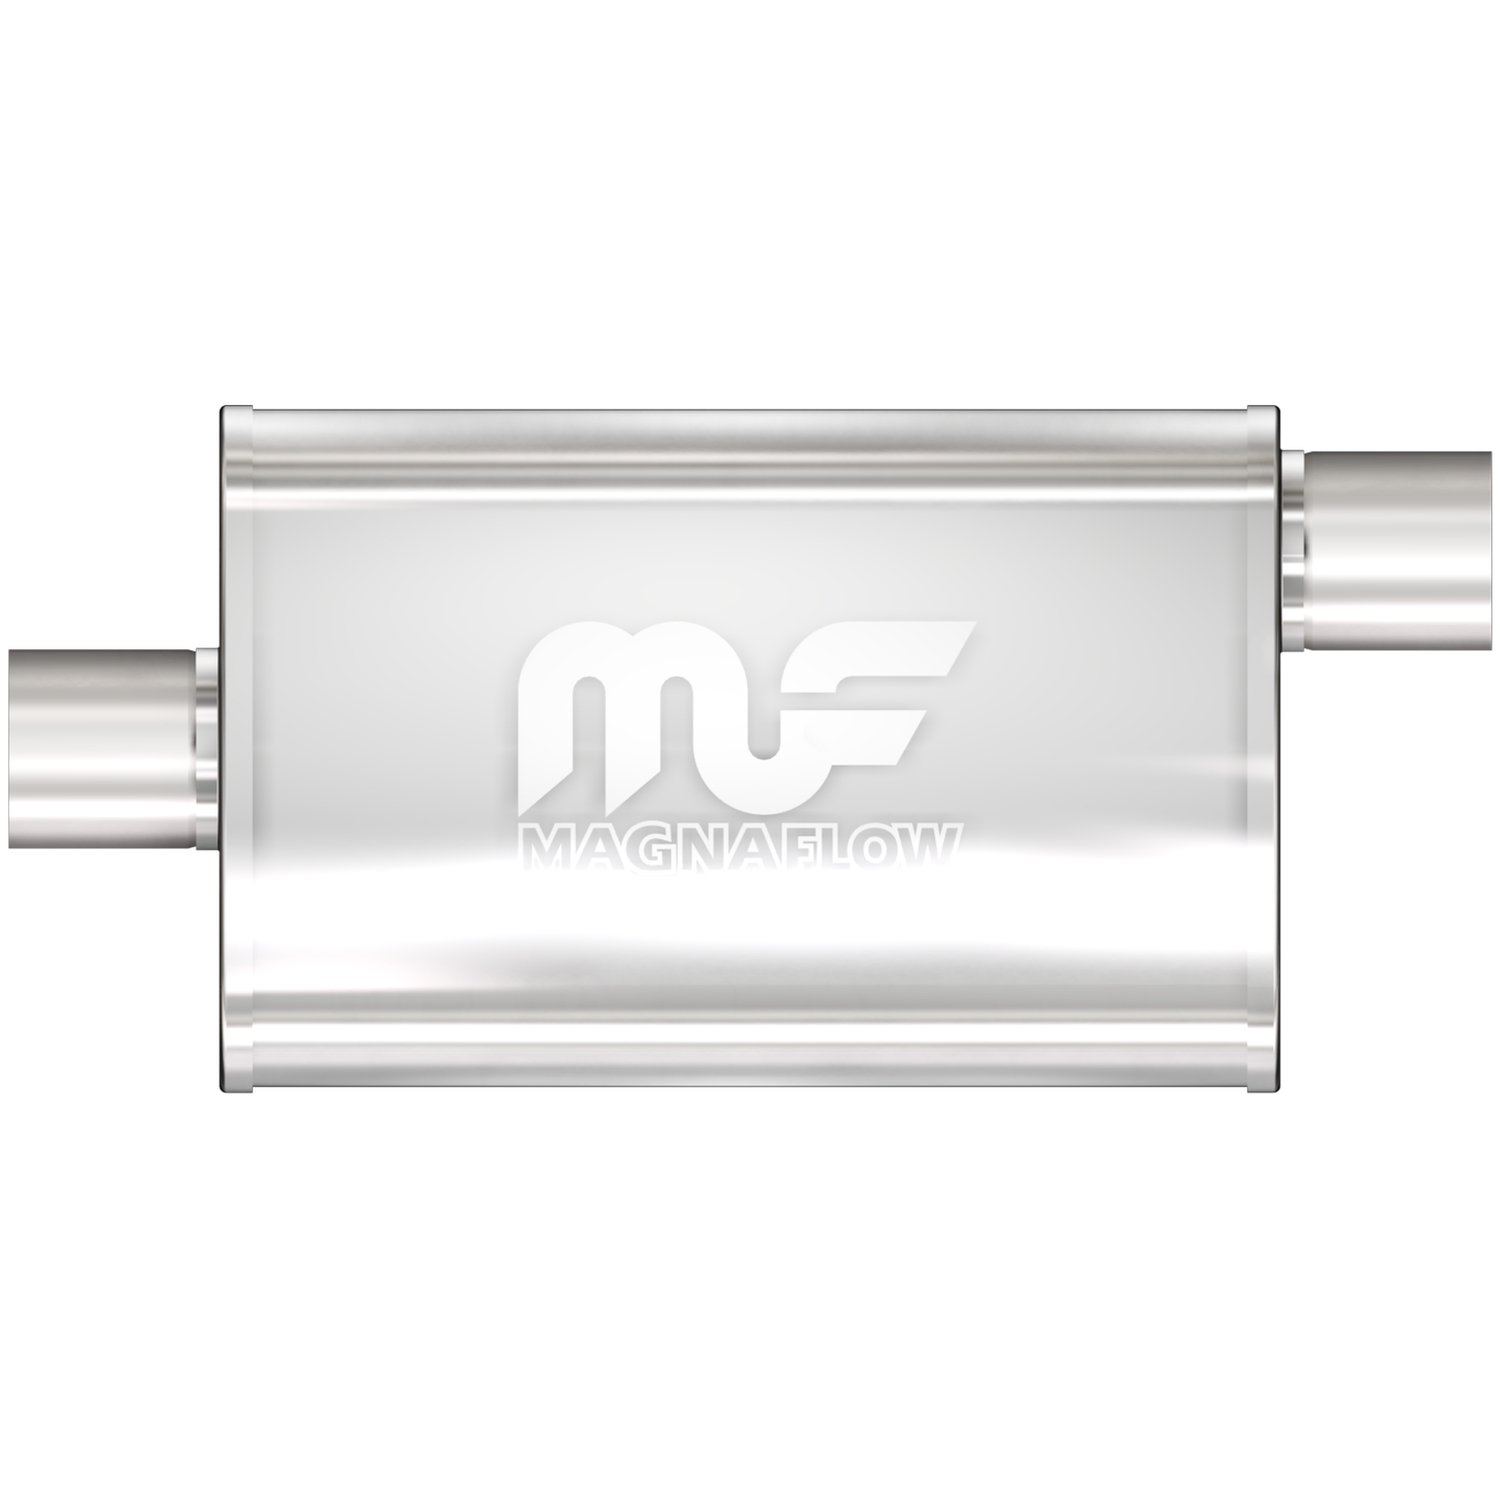 4" x 9" Oval Muffler Offset In/Center Out: 2.5" Body Length: 18" Overall Length: 24" Core Size: 2.5" Satin Finish